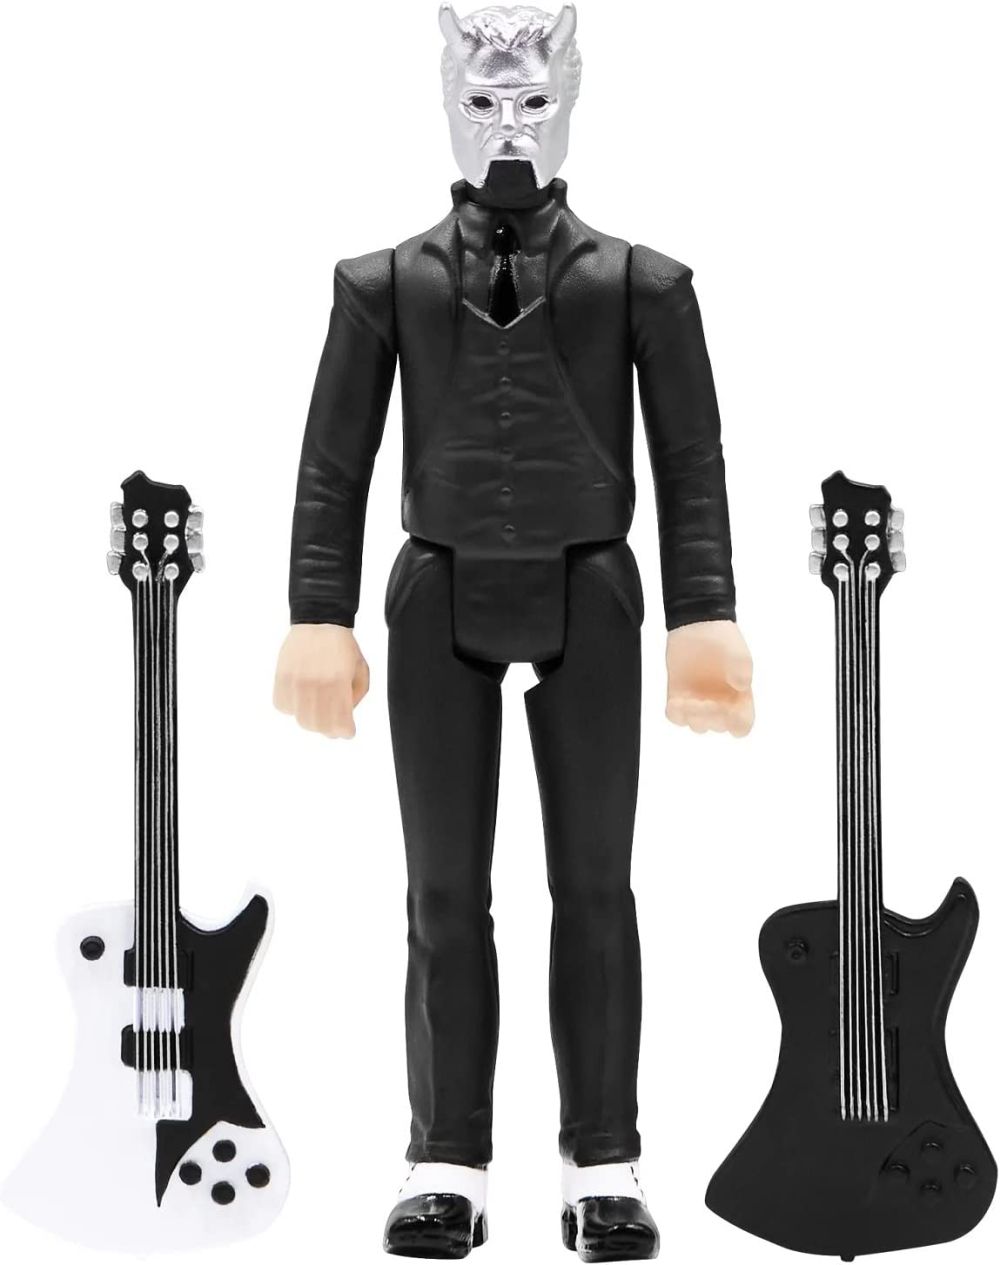 Ghost - Prequelle Nameless Ghoul II 3.75 inch Super7 ReAction Figure